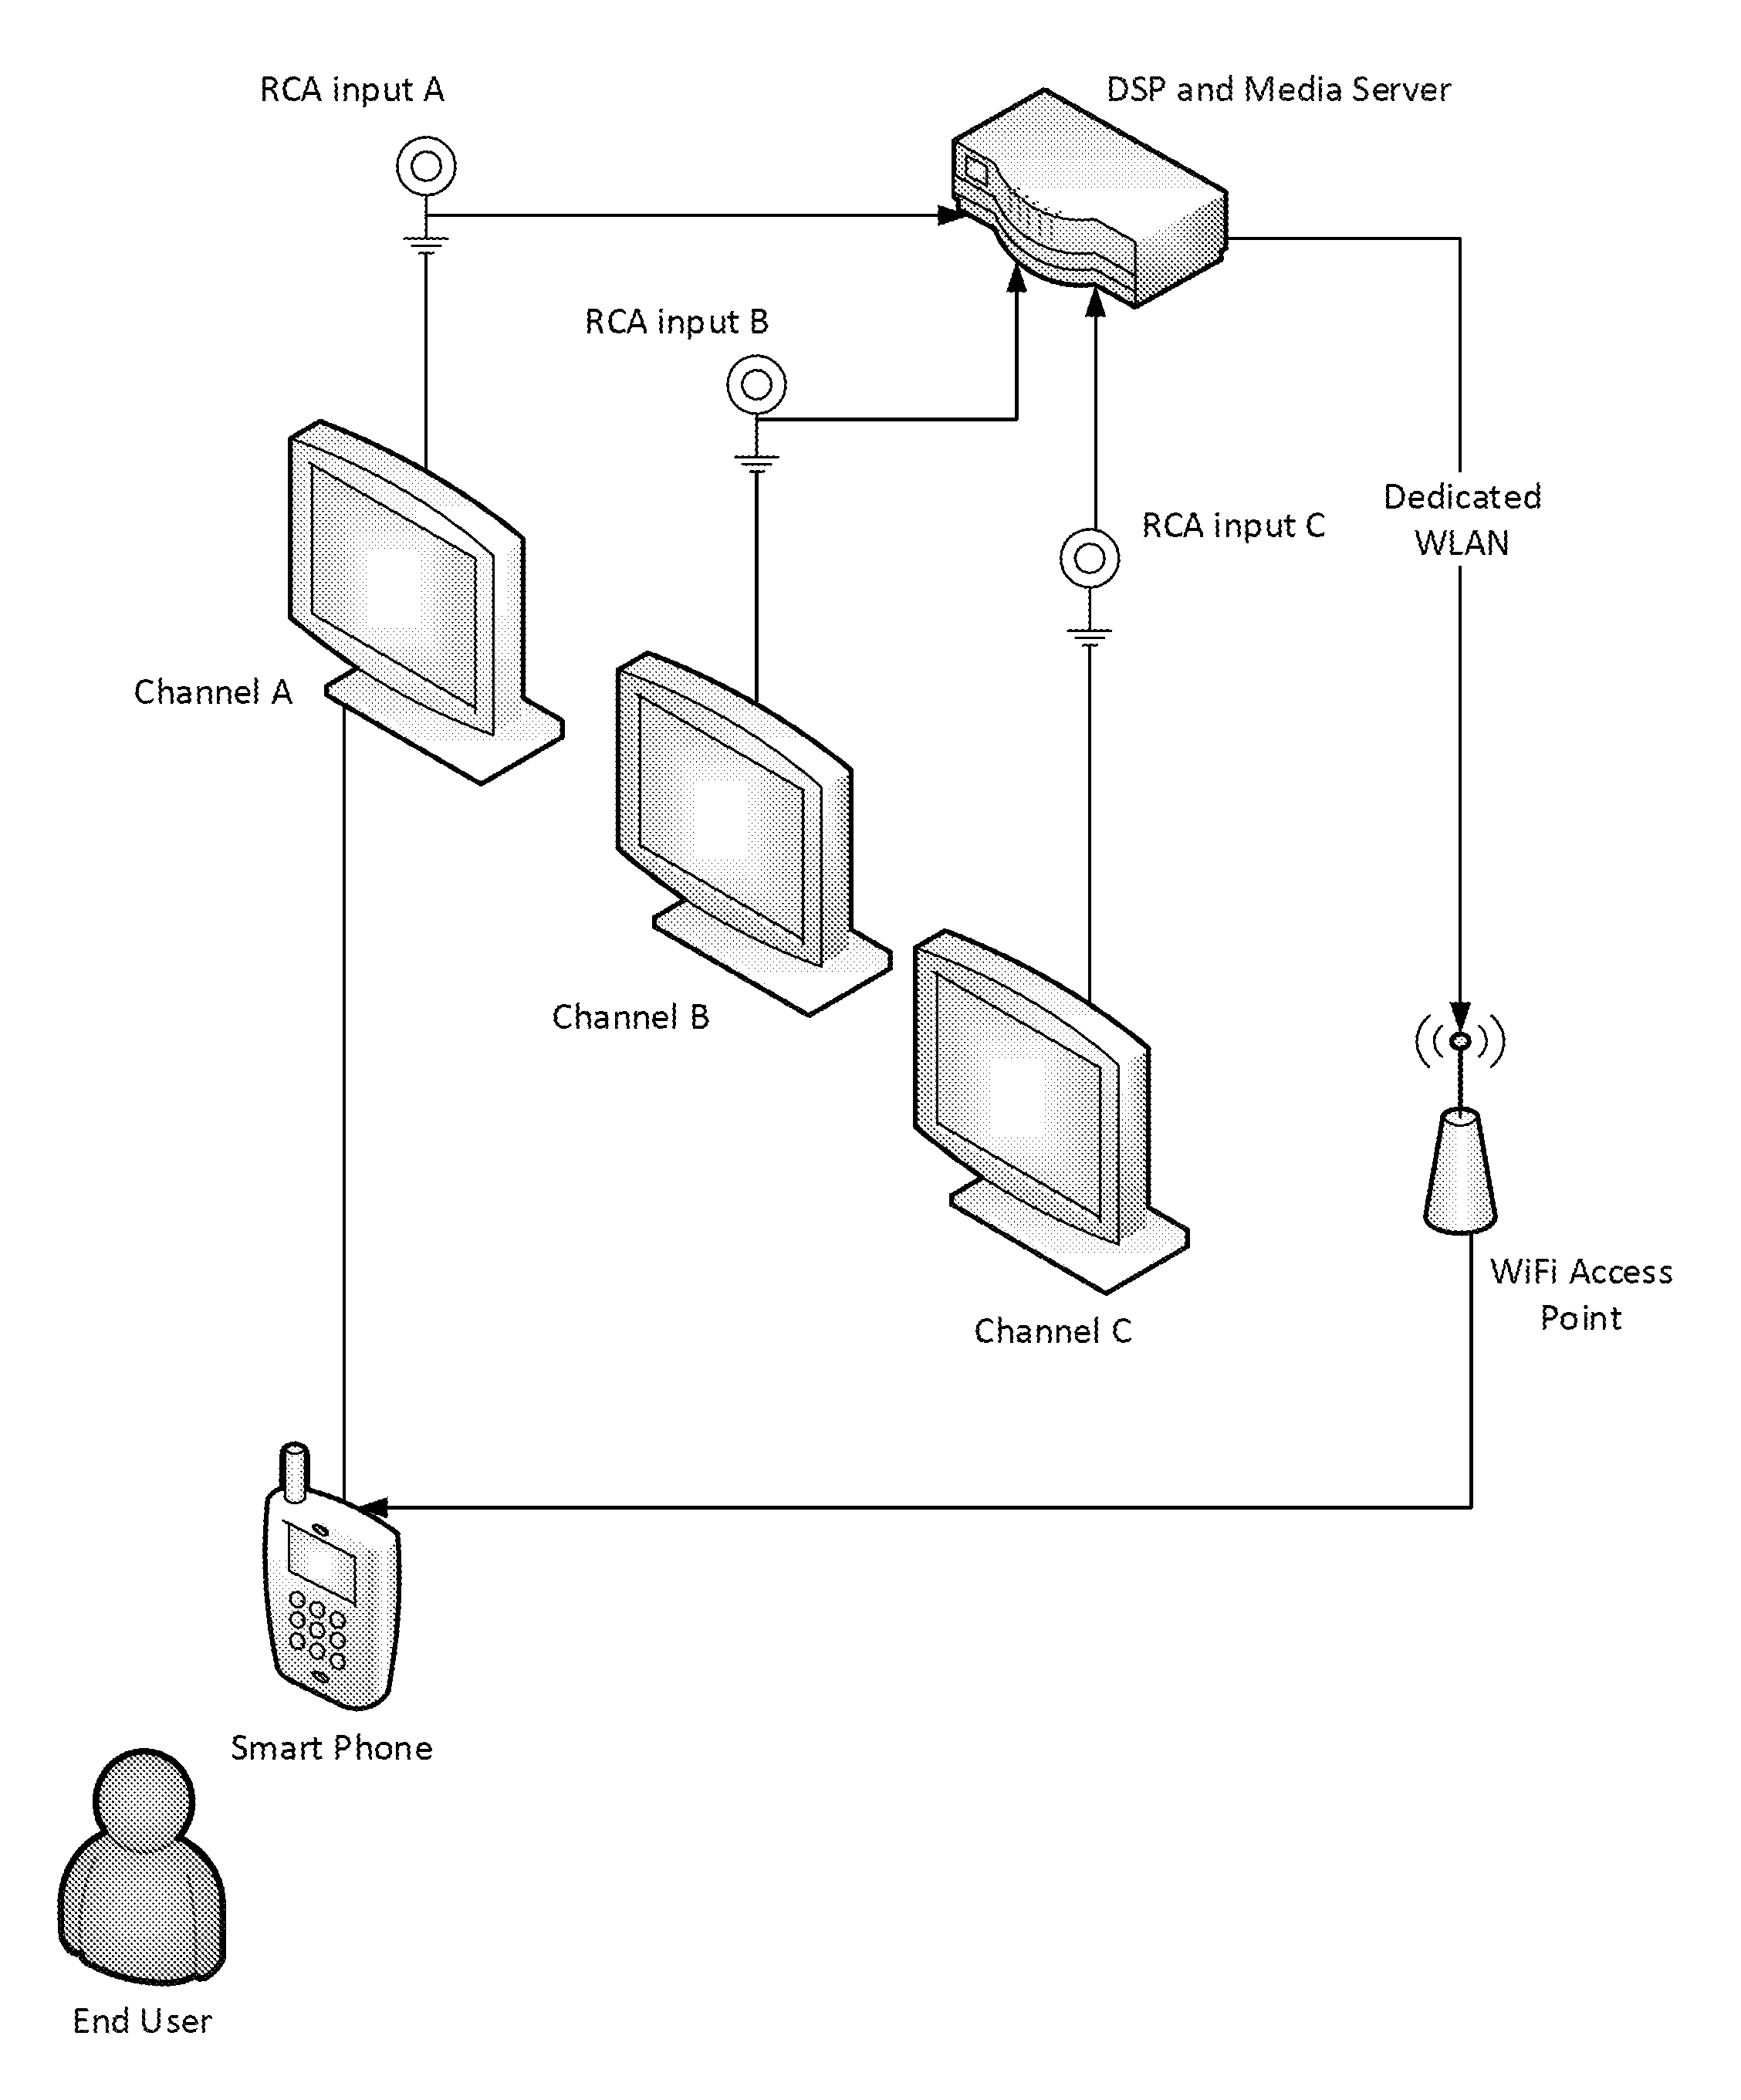 Synchronous audio distribution to portable computing devices